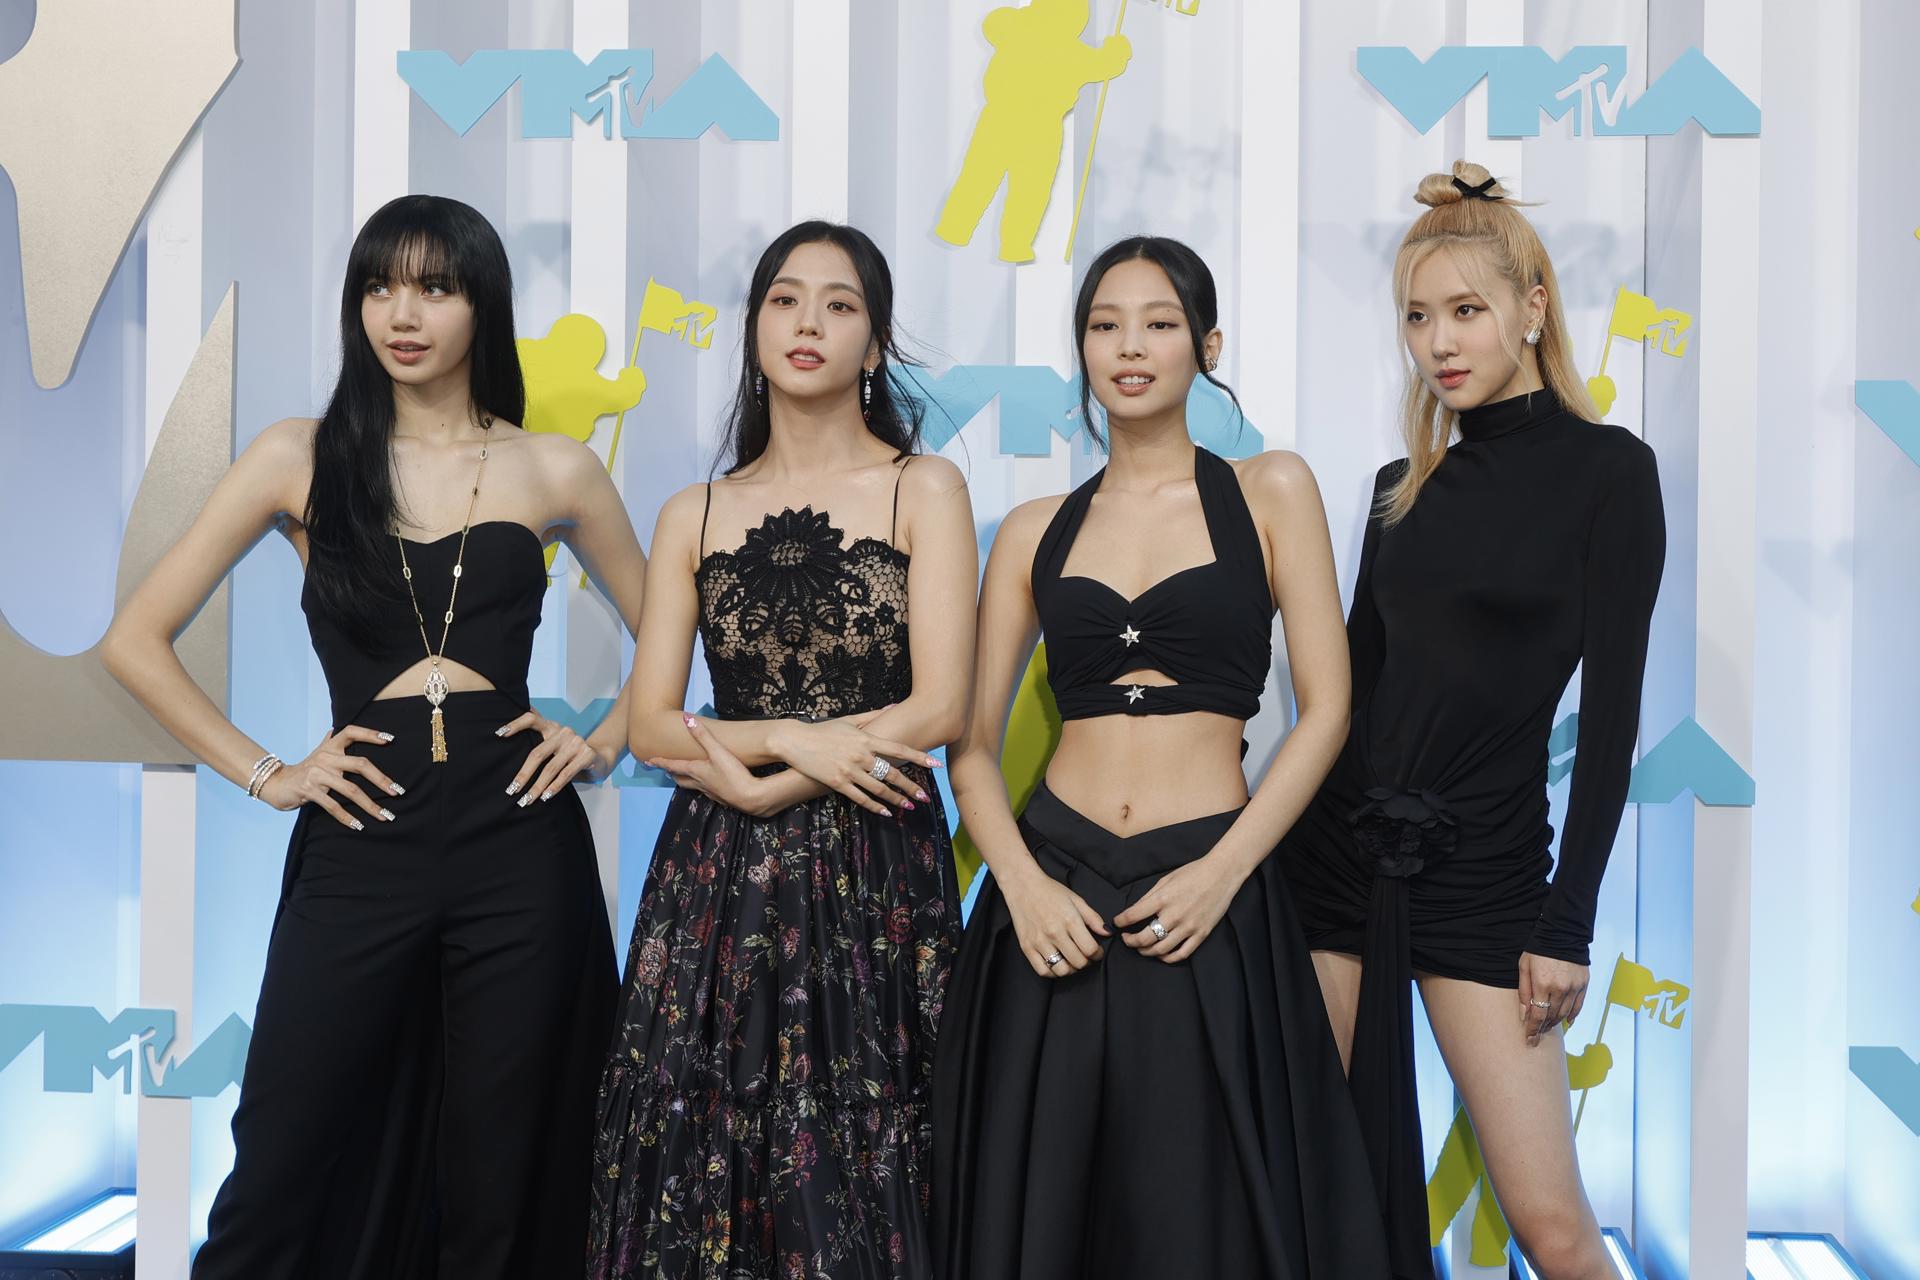 (L-R) Lisa, Jisoo, Jennie, and Rose of BLACKPINK pose on the red carpet at the MTV Video Music Awards at the Prudential Center in Newark, New Jersey, USA, 28 August 2022. EFE-EPA FILE/JASON SZENES